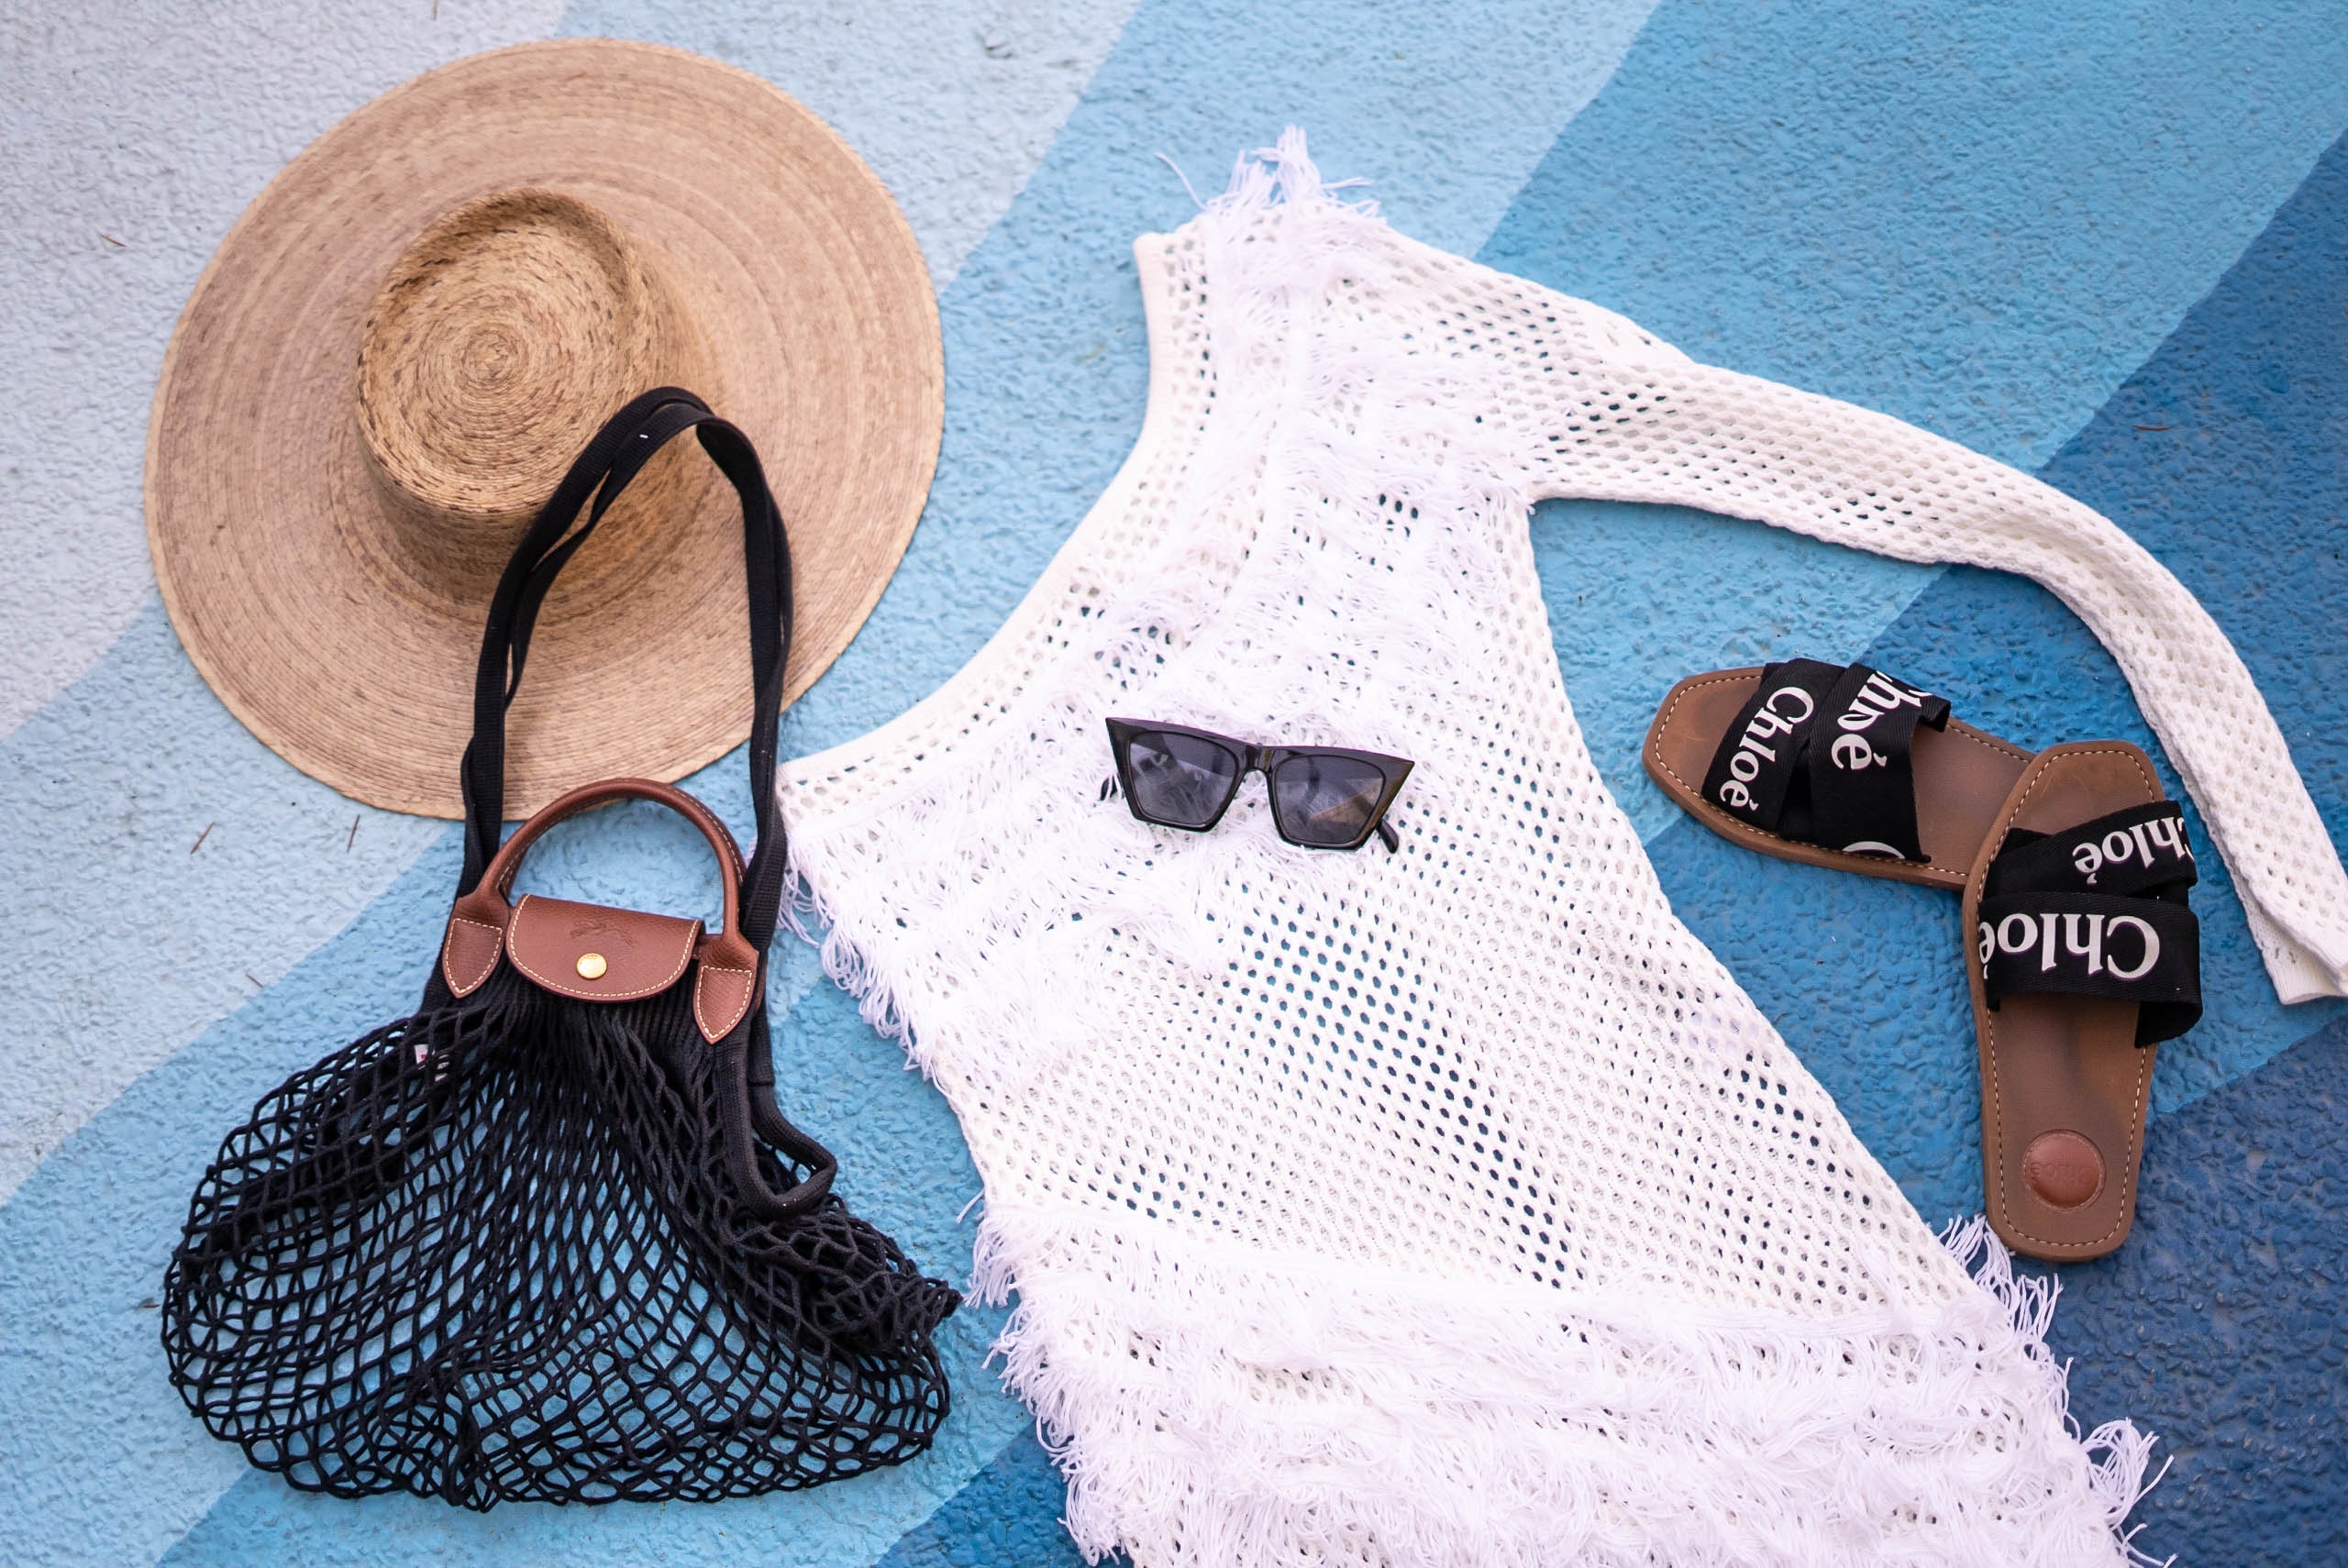 The Revolve Tularosa Peek A Boo dress and coverup styled with a Lack of Color hat, chloe woody sandals and longchamp bag.